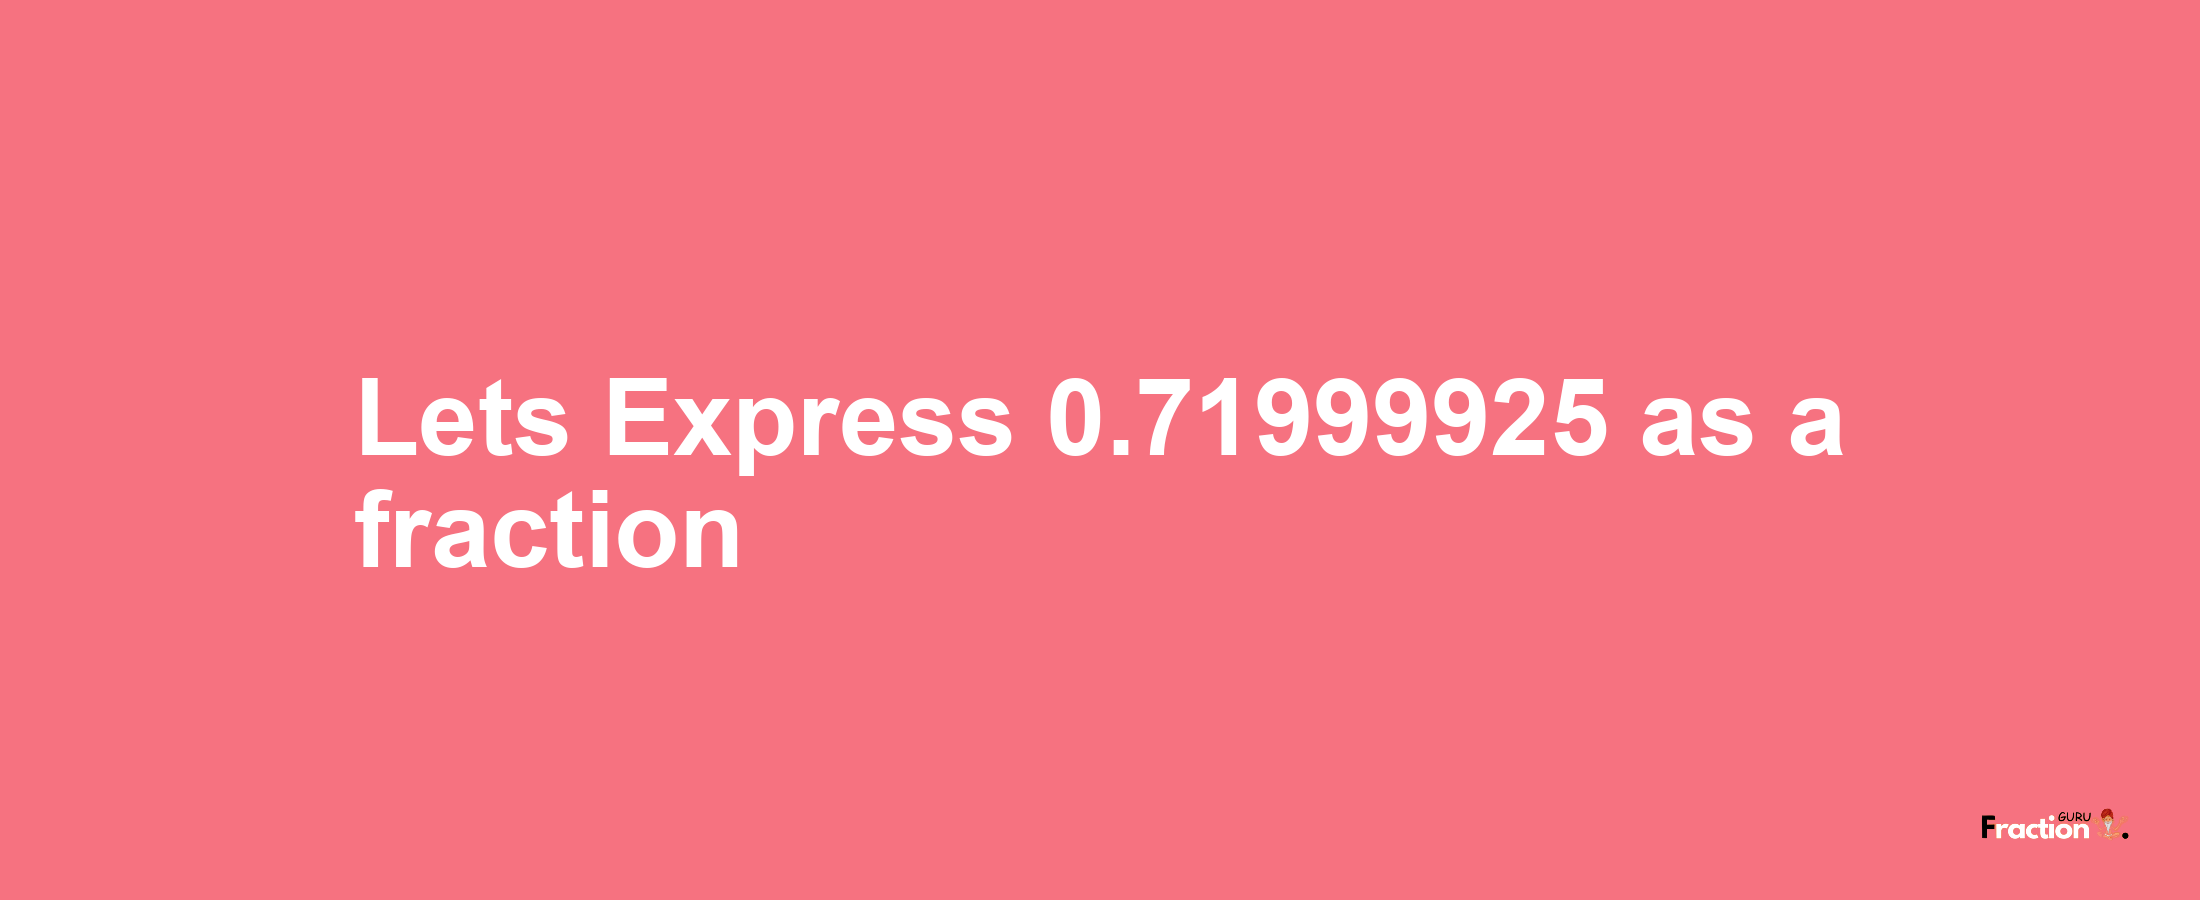 Lets Express 0.71999925 as afraction